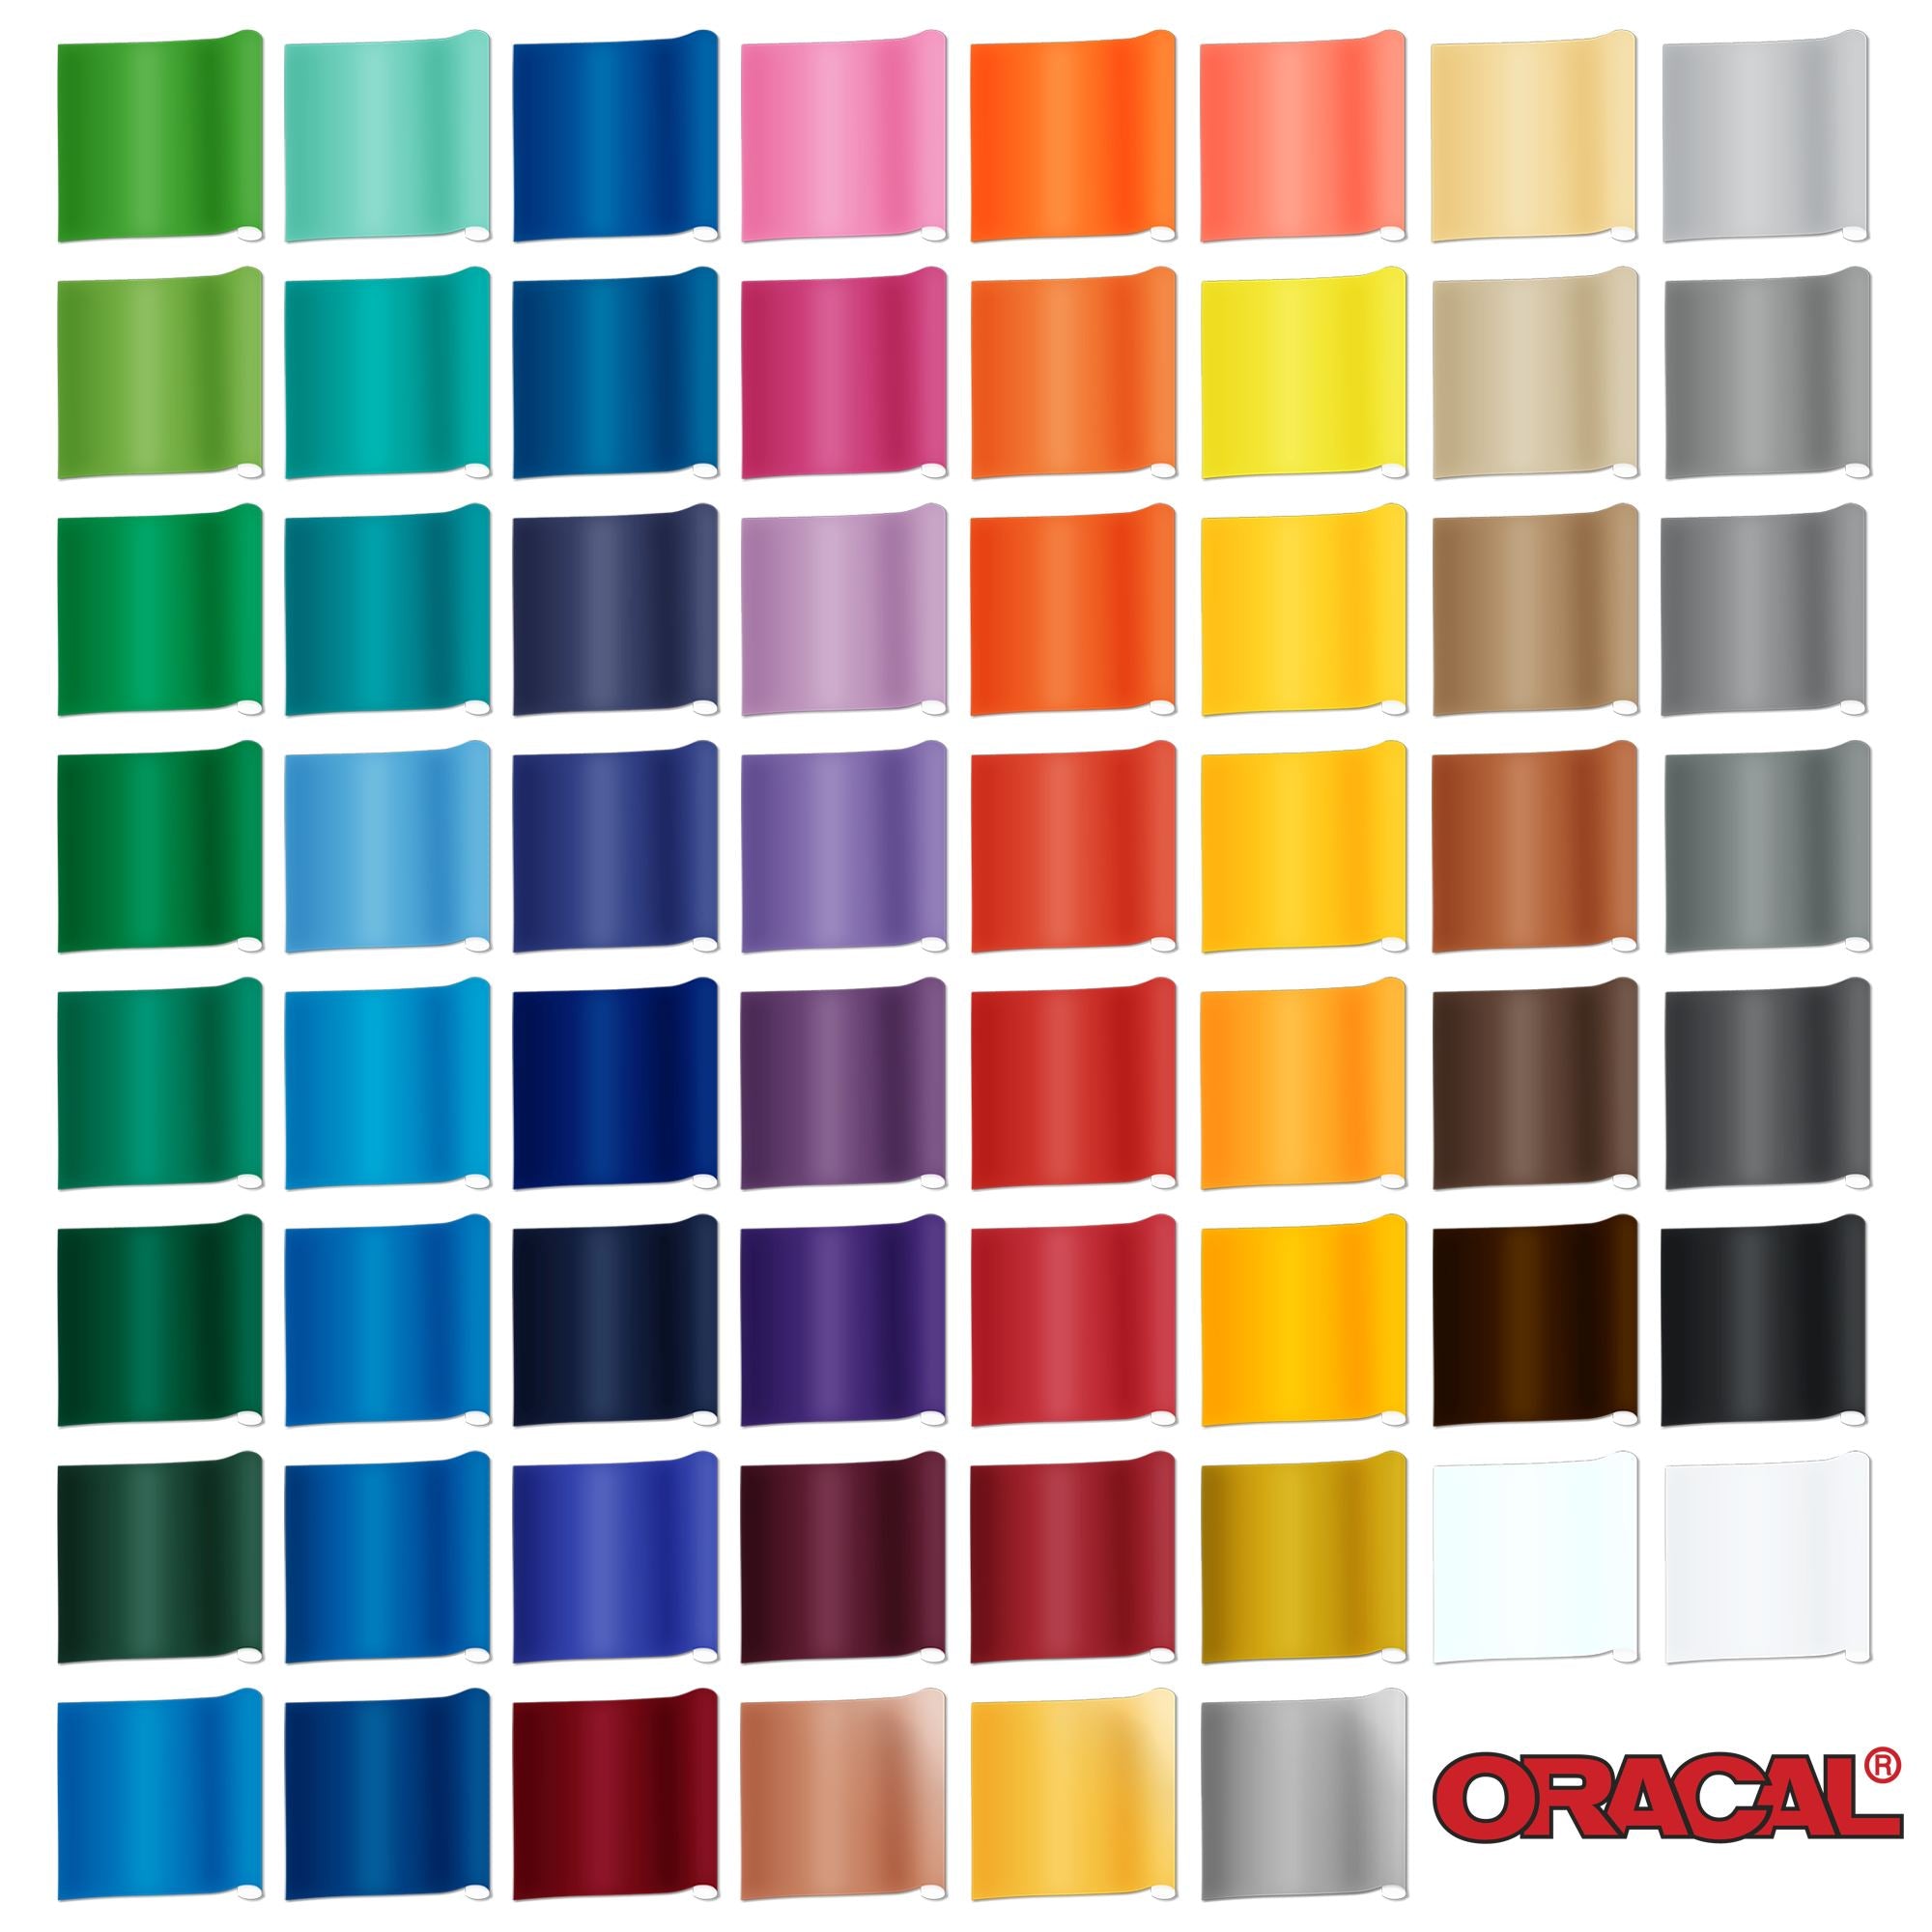 Oracal 651 Glossy Vinyl Sheets 12 x 12 - Sale!